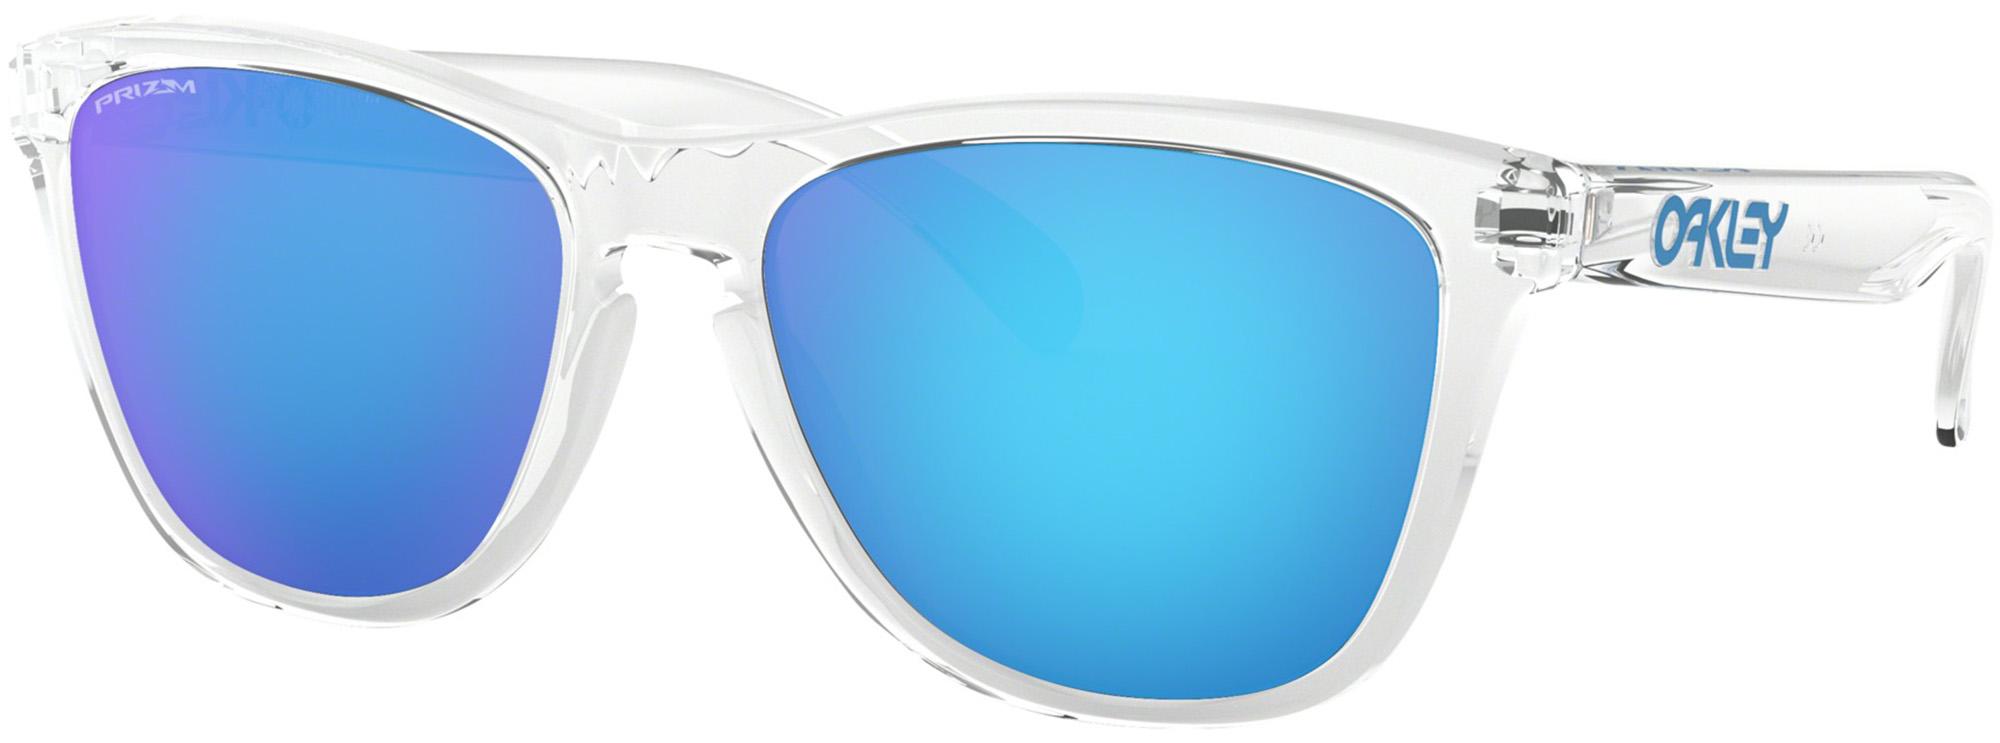 Oakley Frogskins Prizm Sapphire Sunglasses  Crystal Clear